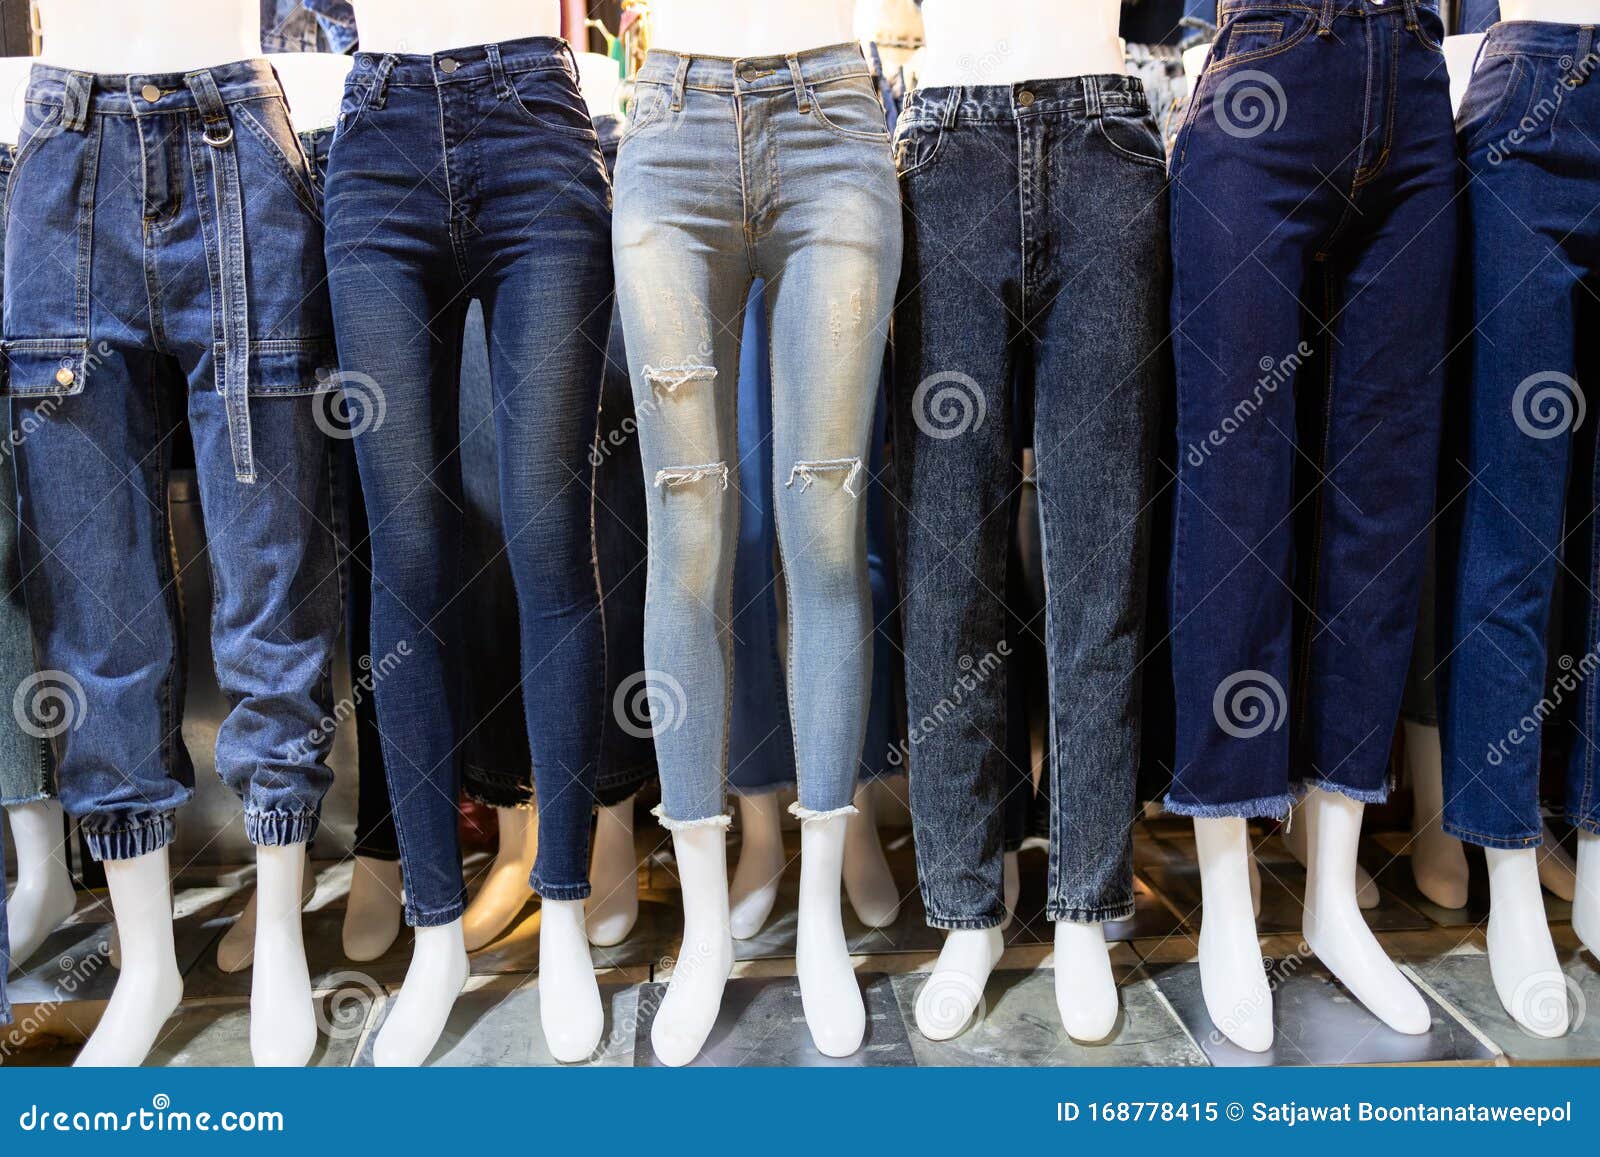 Types Of Jeans For Men 7 Different Jeans Types For Men With Names